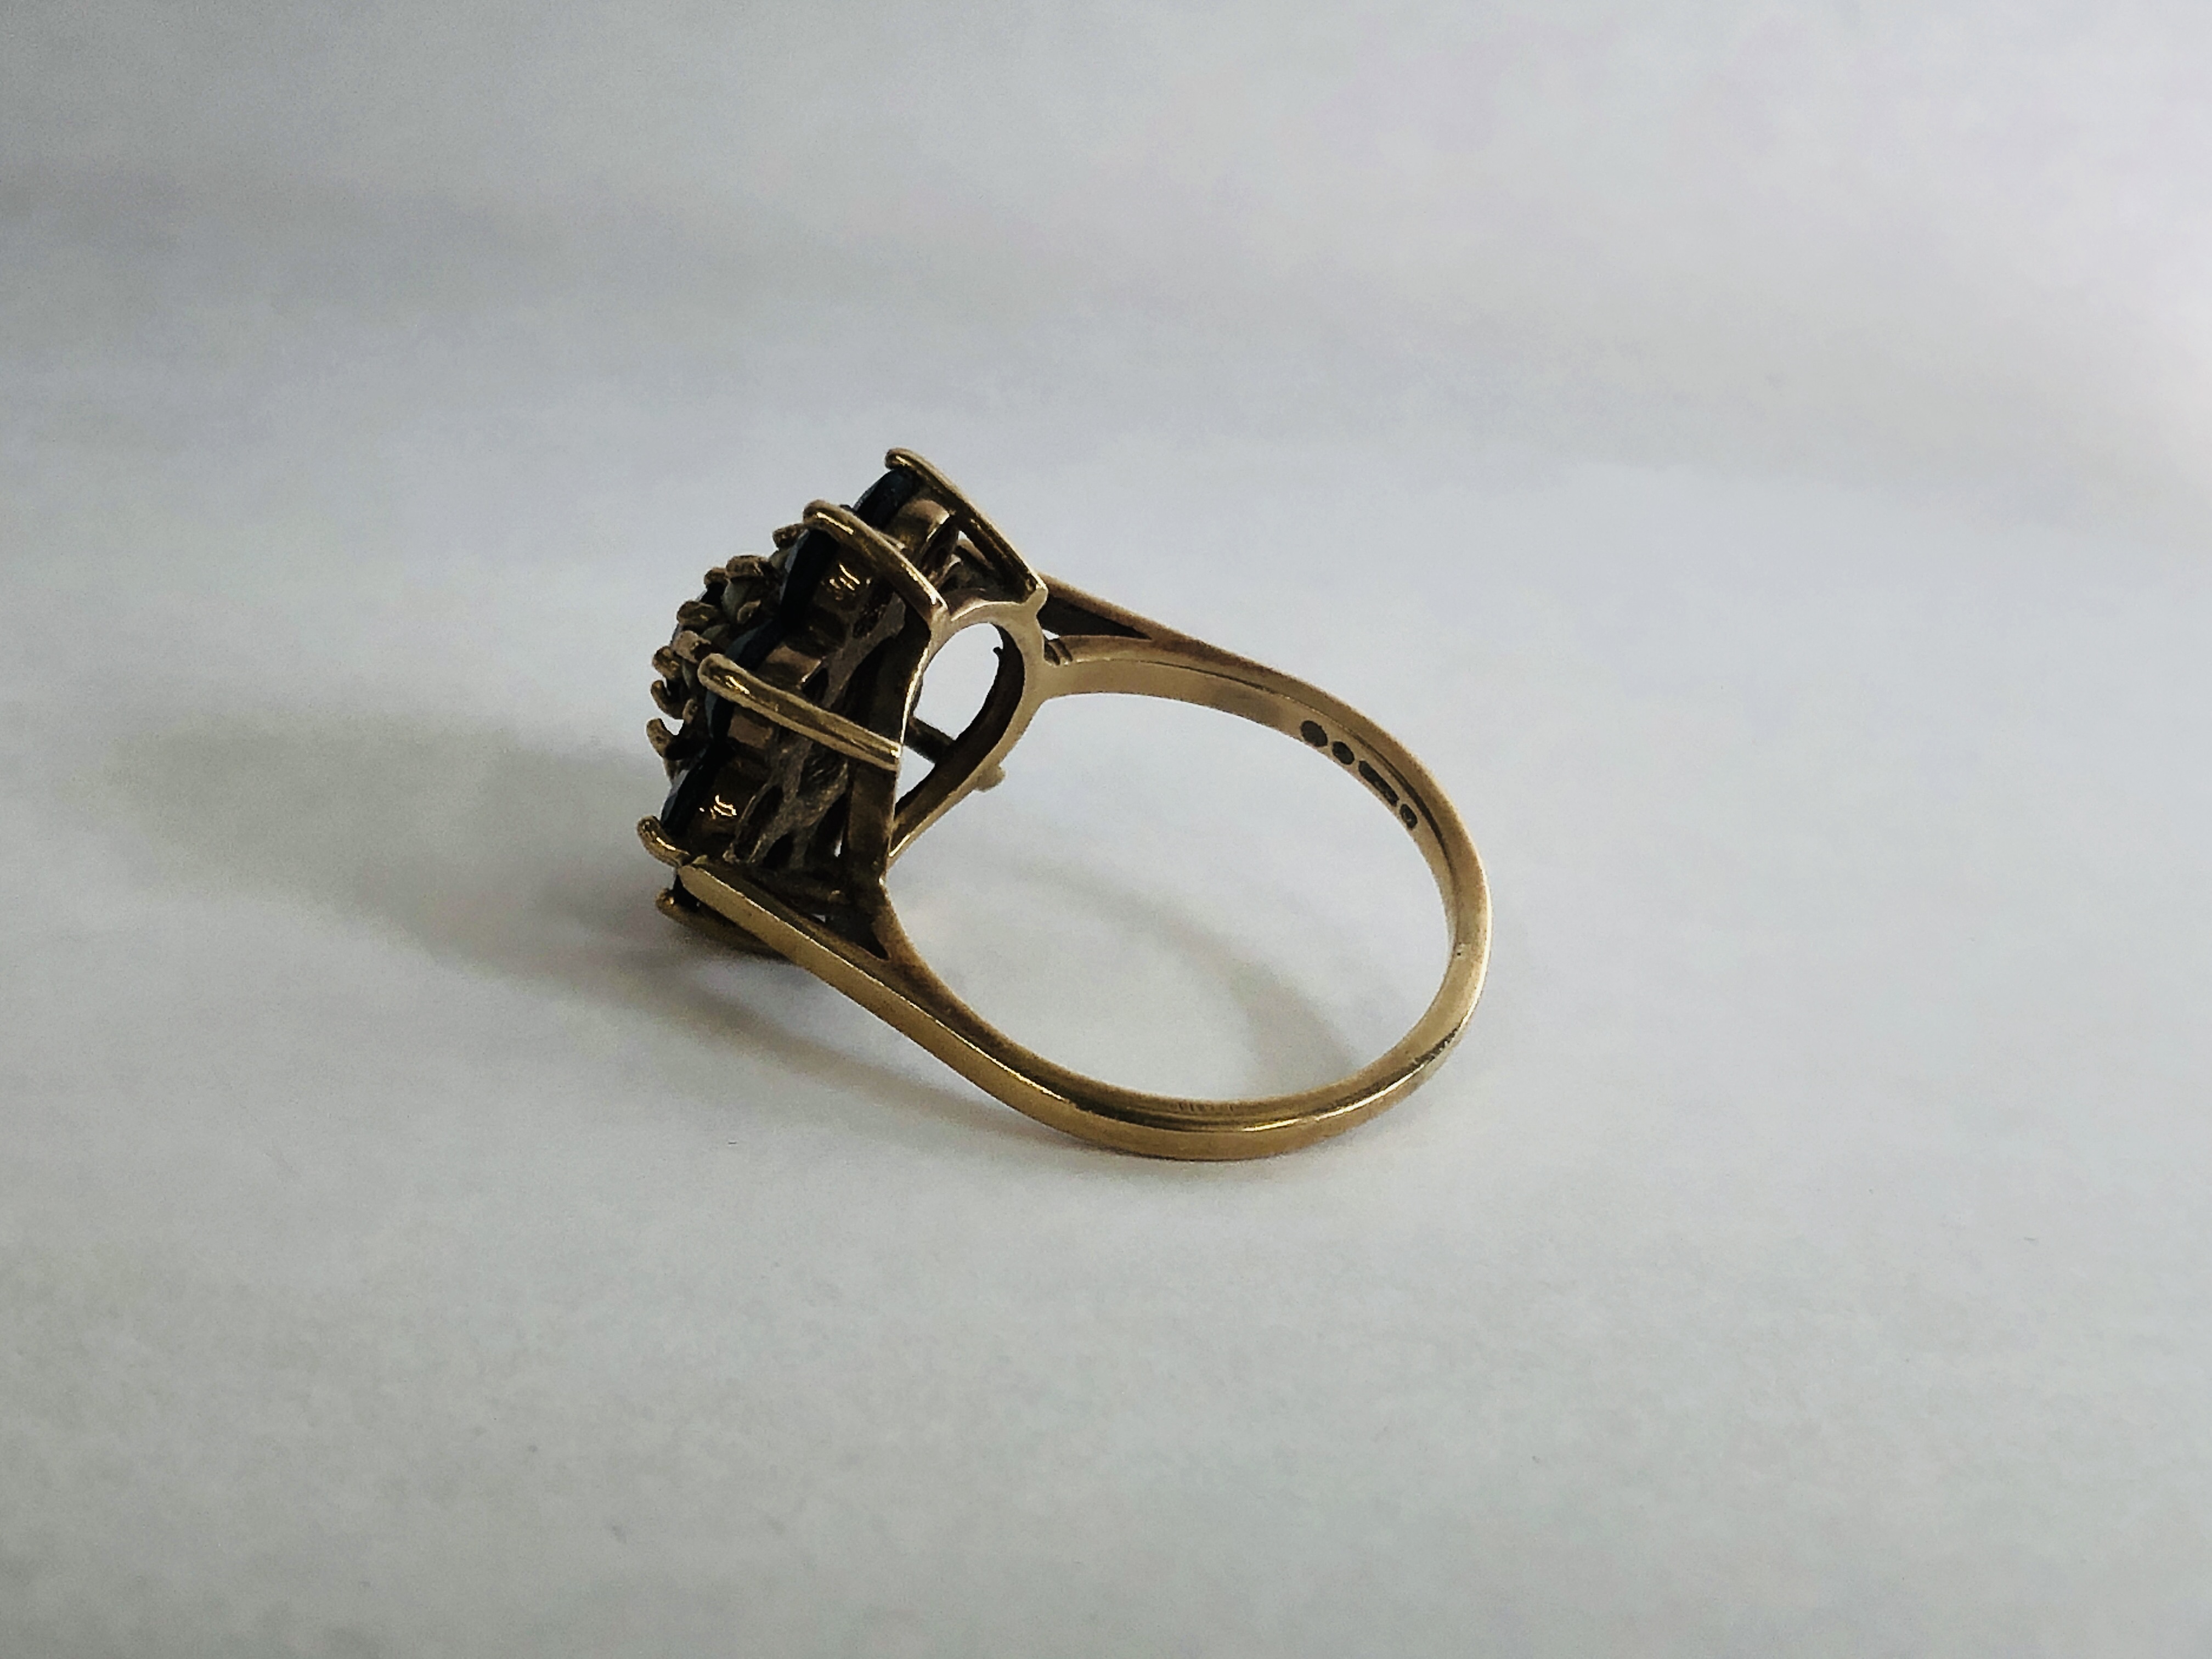 9CT GOLD LADIES RING, FLOWER HEAD DESIGN SET WITH GARNETS AND SEED PEARLS (1 SEED PEARL MISSING). - Image 3 of 9